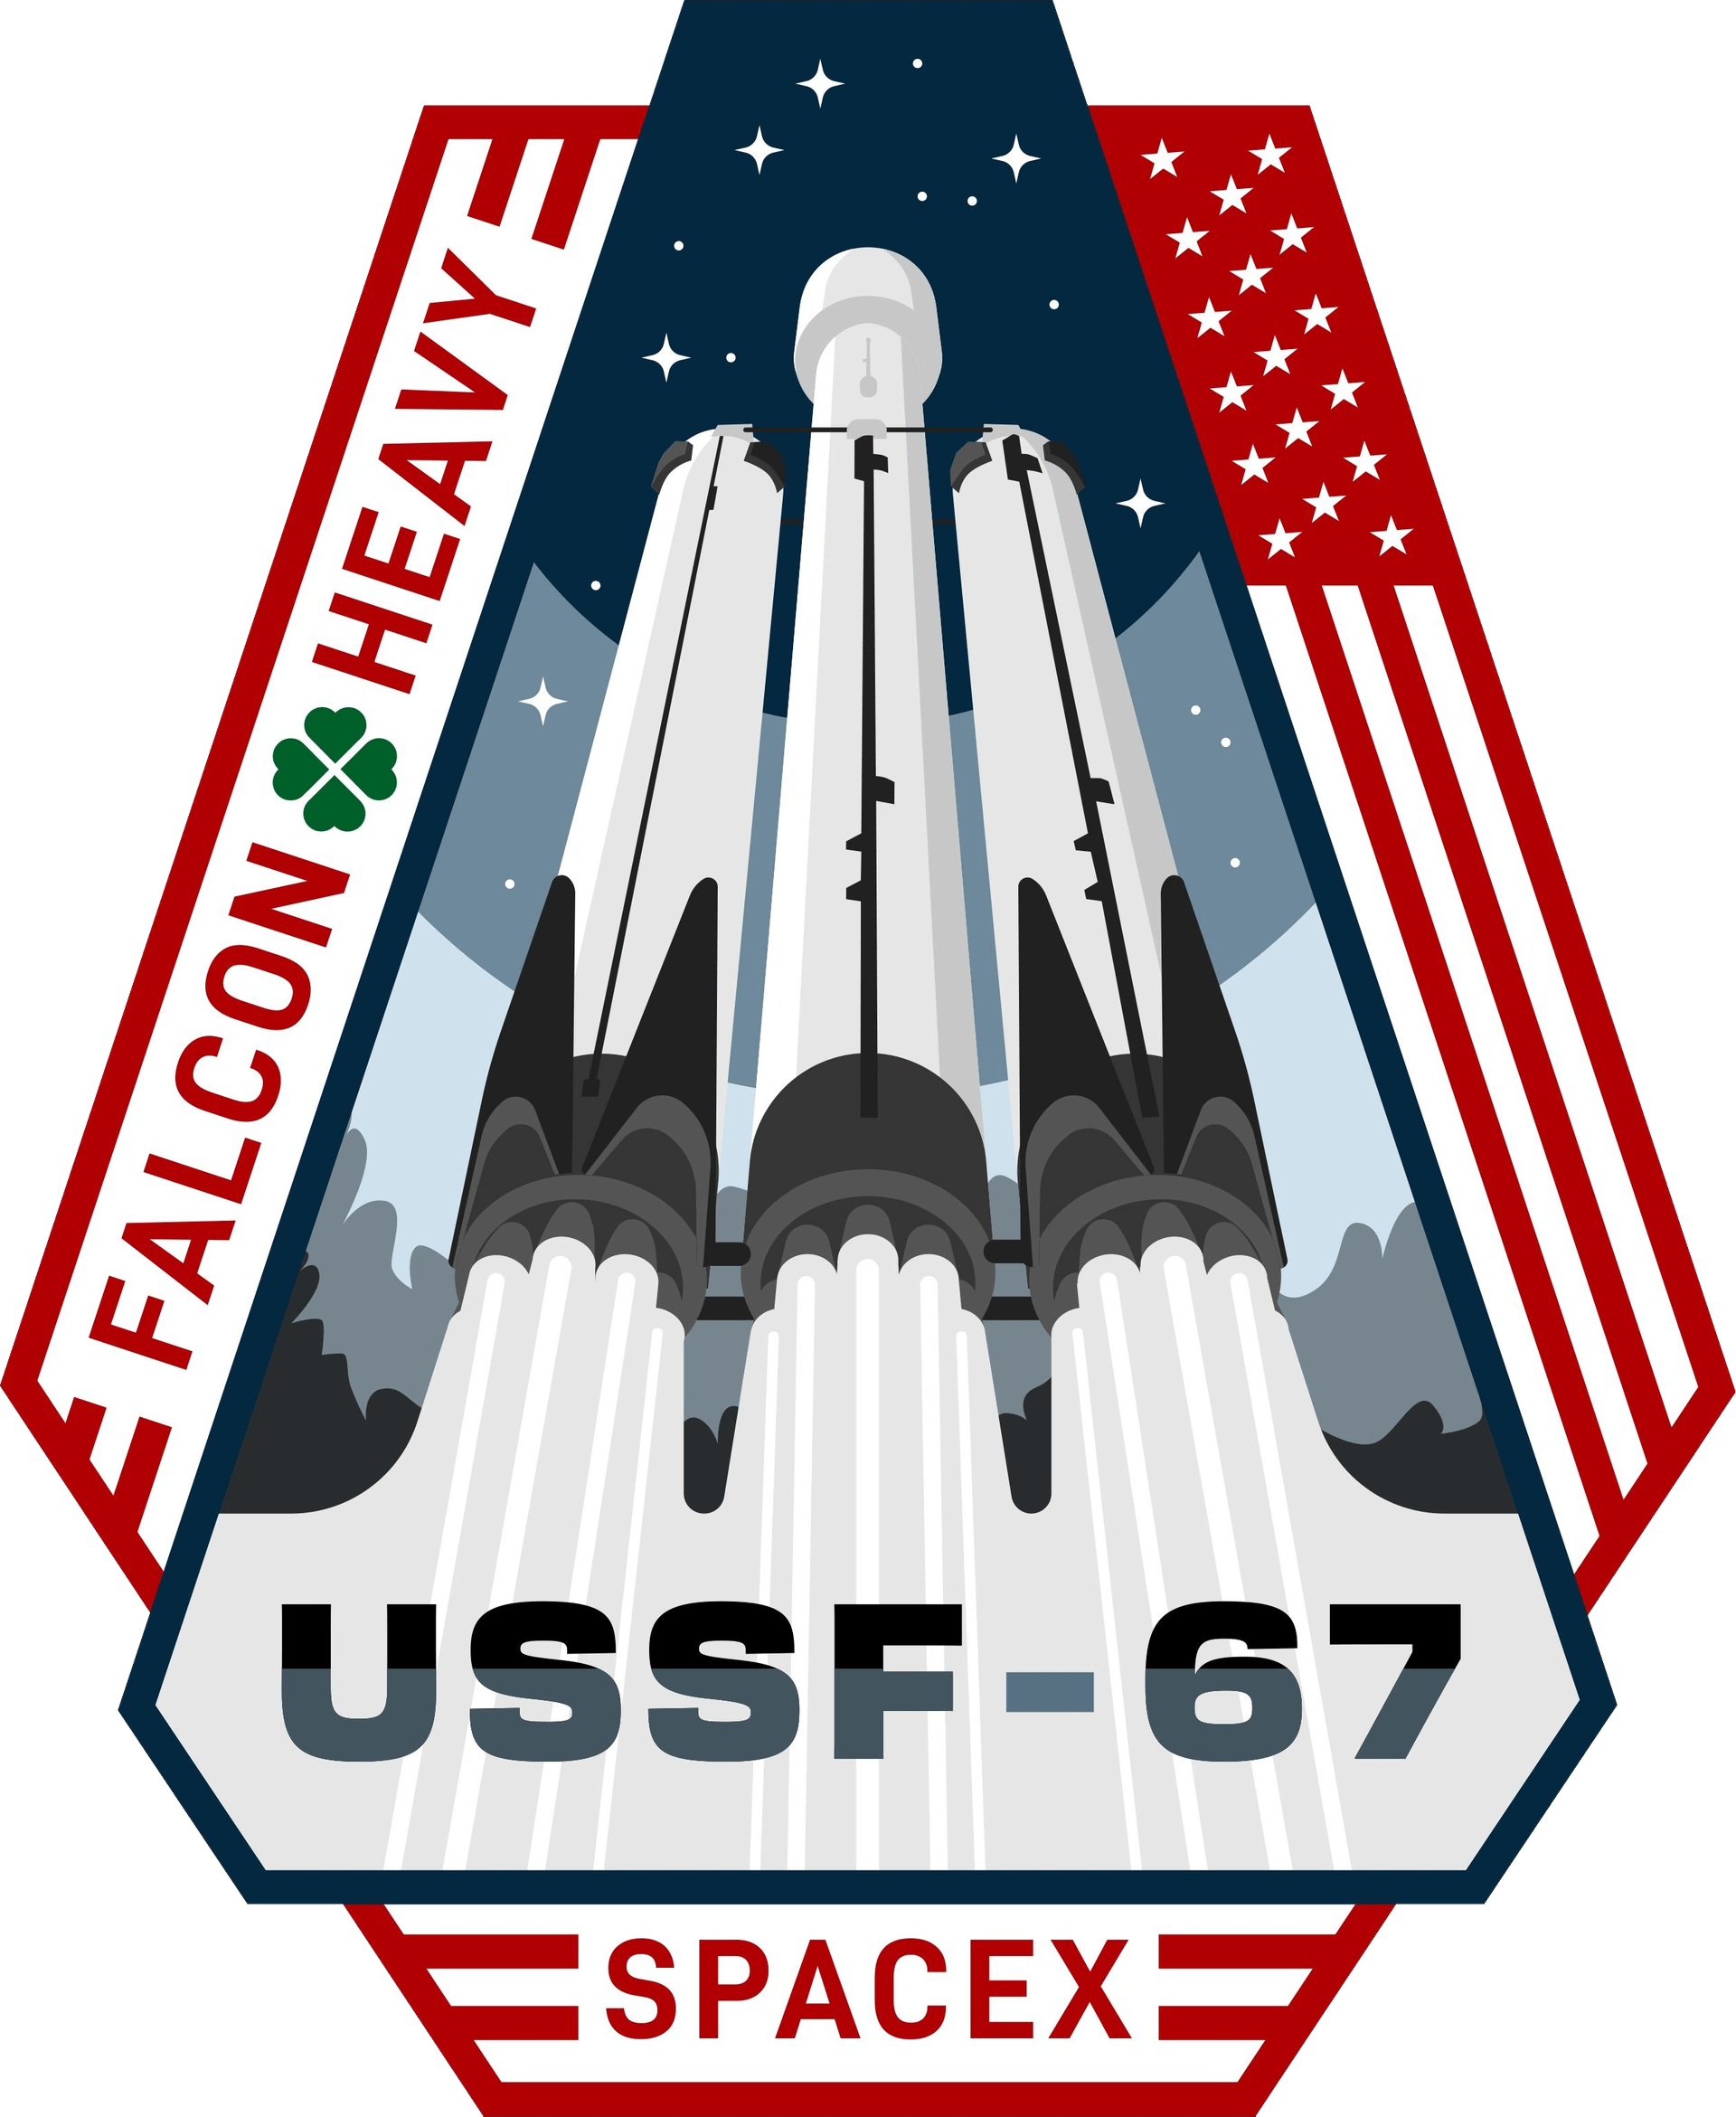 Mission patch for USSF-67